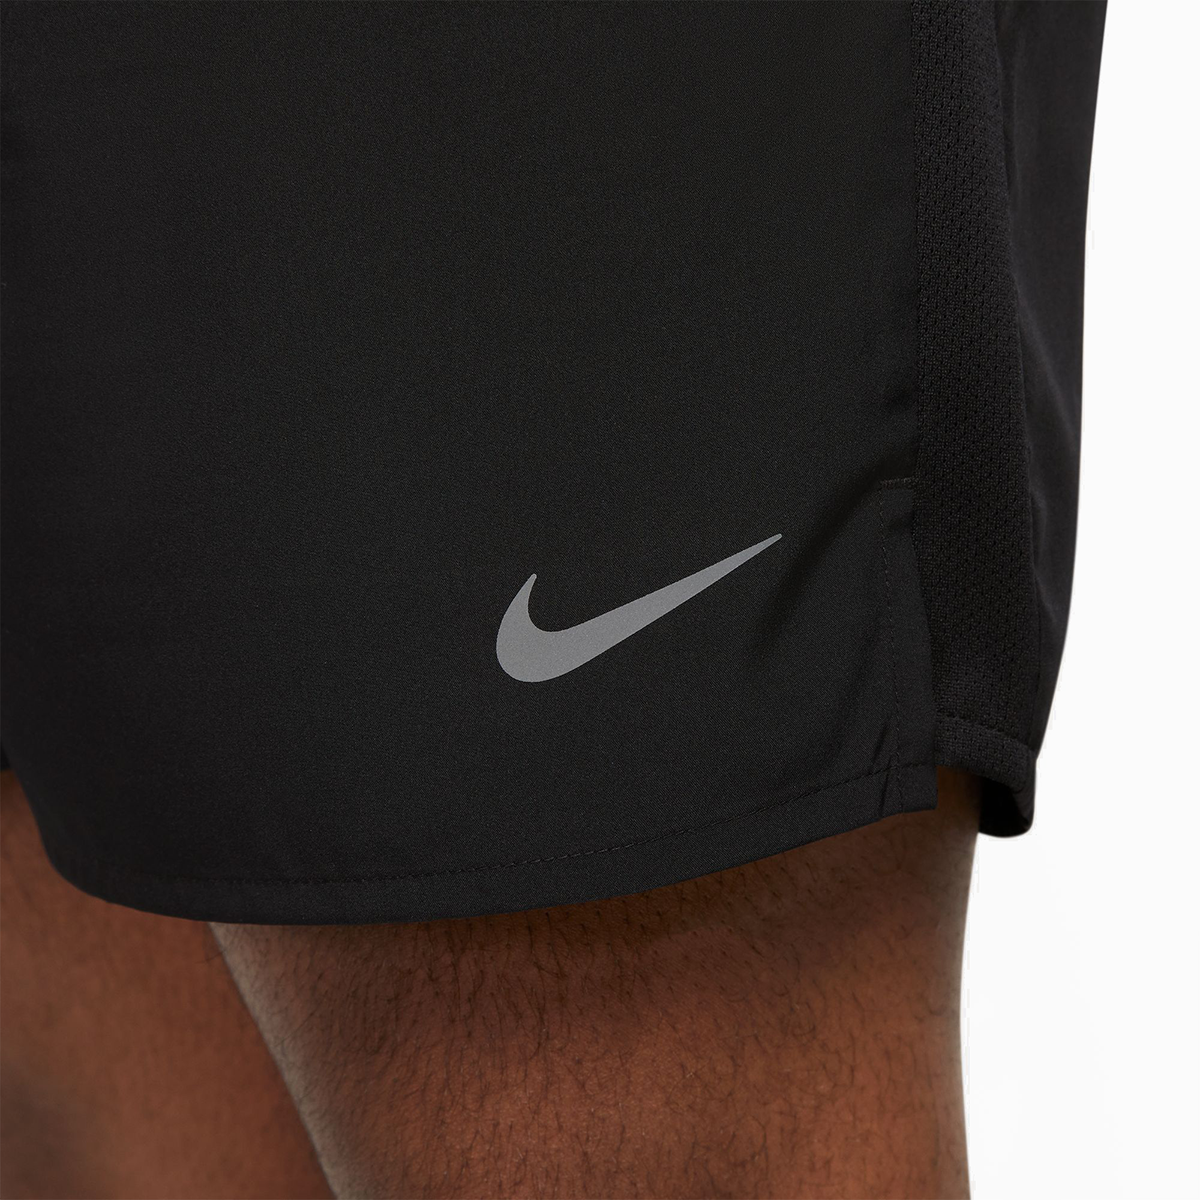 Nike Dri-FIT Challenger Short 7BF, , large image number null